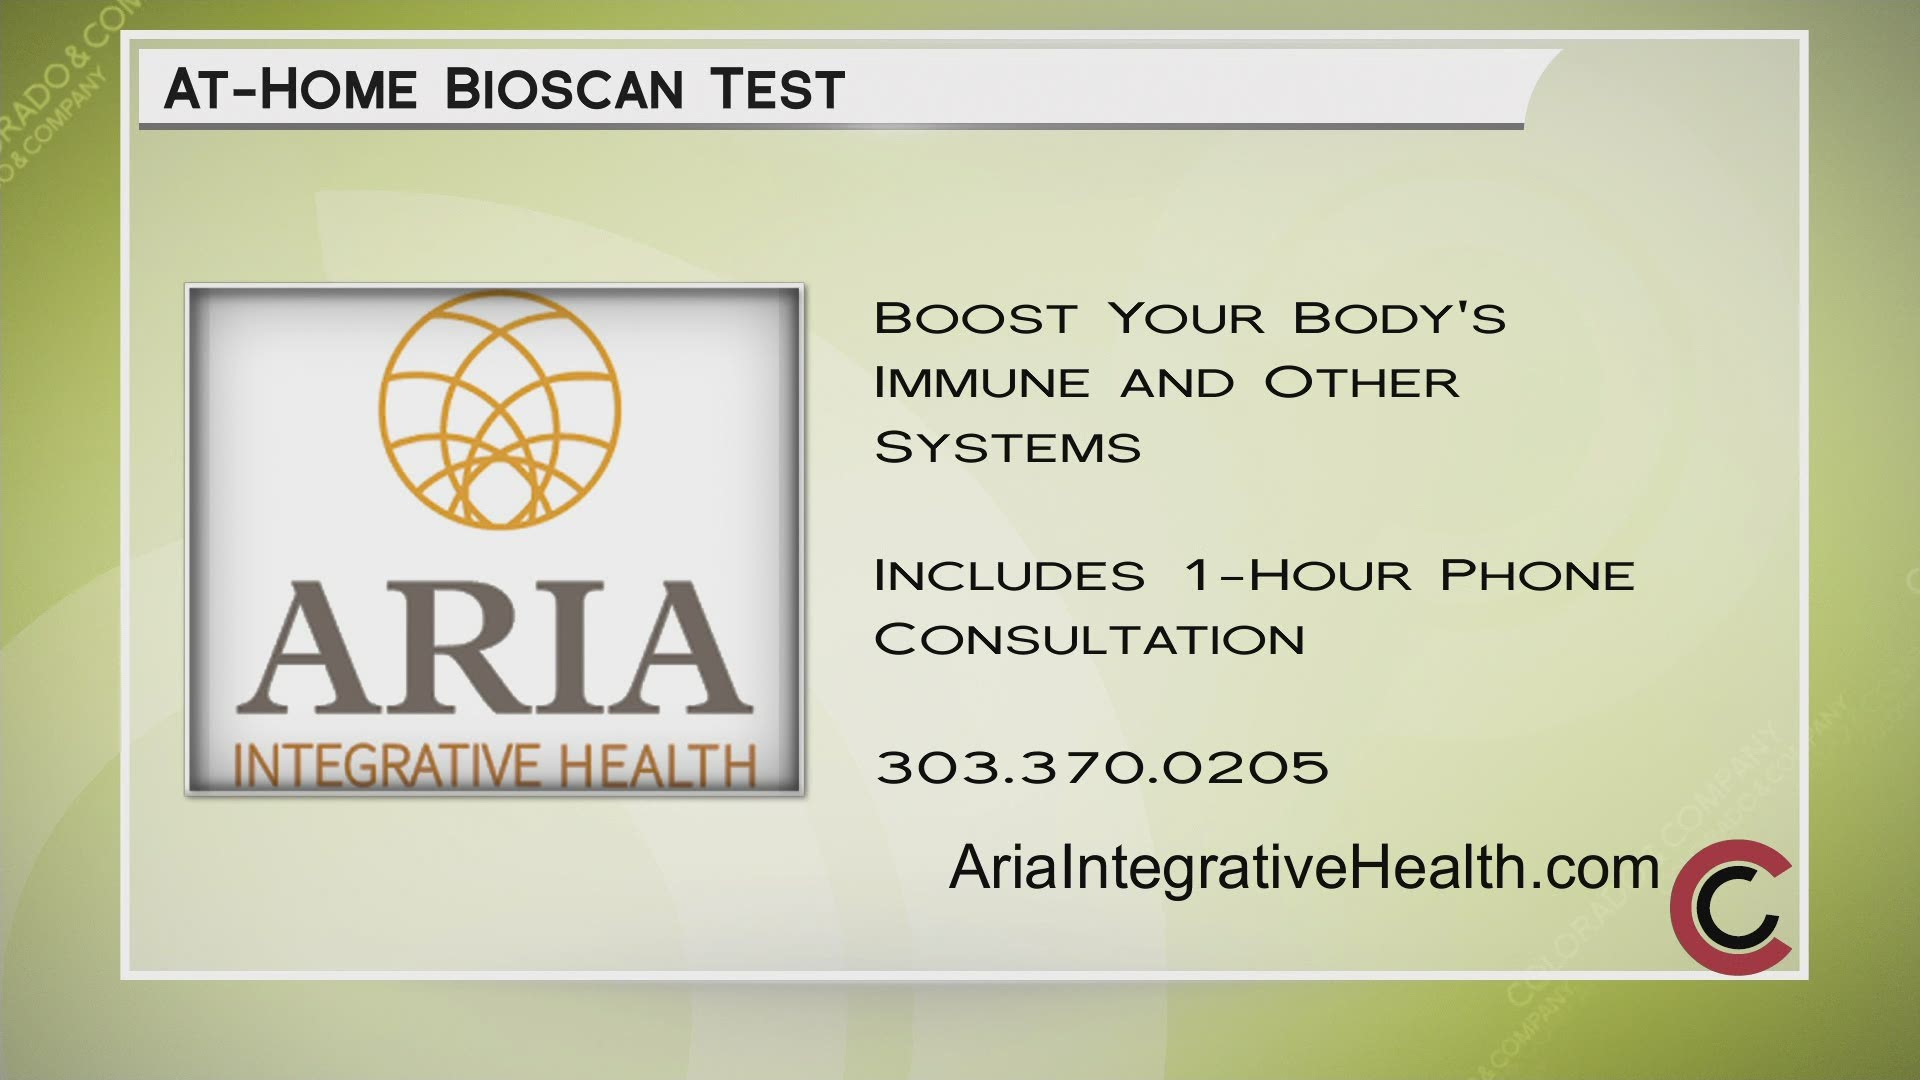 An at-home Bioscan from Aria gives you a complete picture of your key body systems. Learn more and get started online at AriaIntegrativeHealth.com or 303.370.0205.